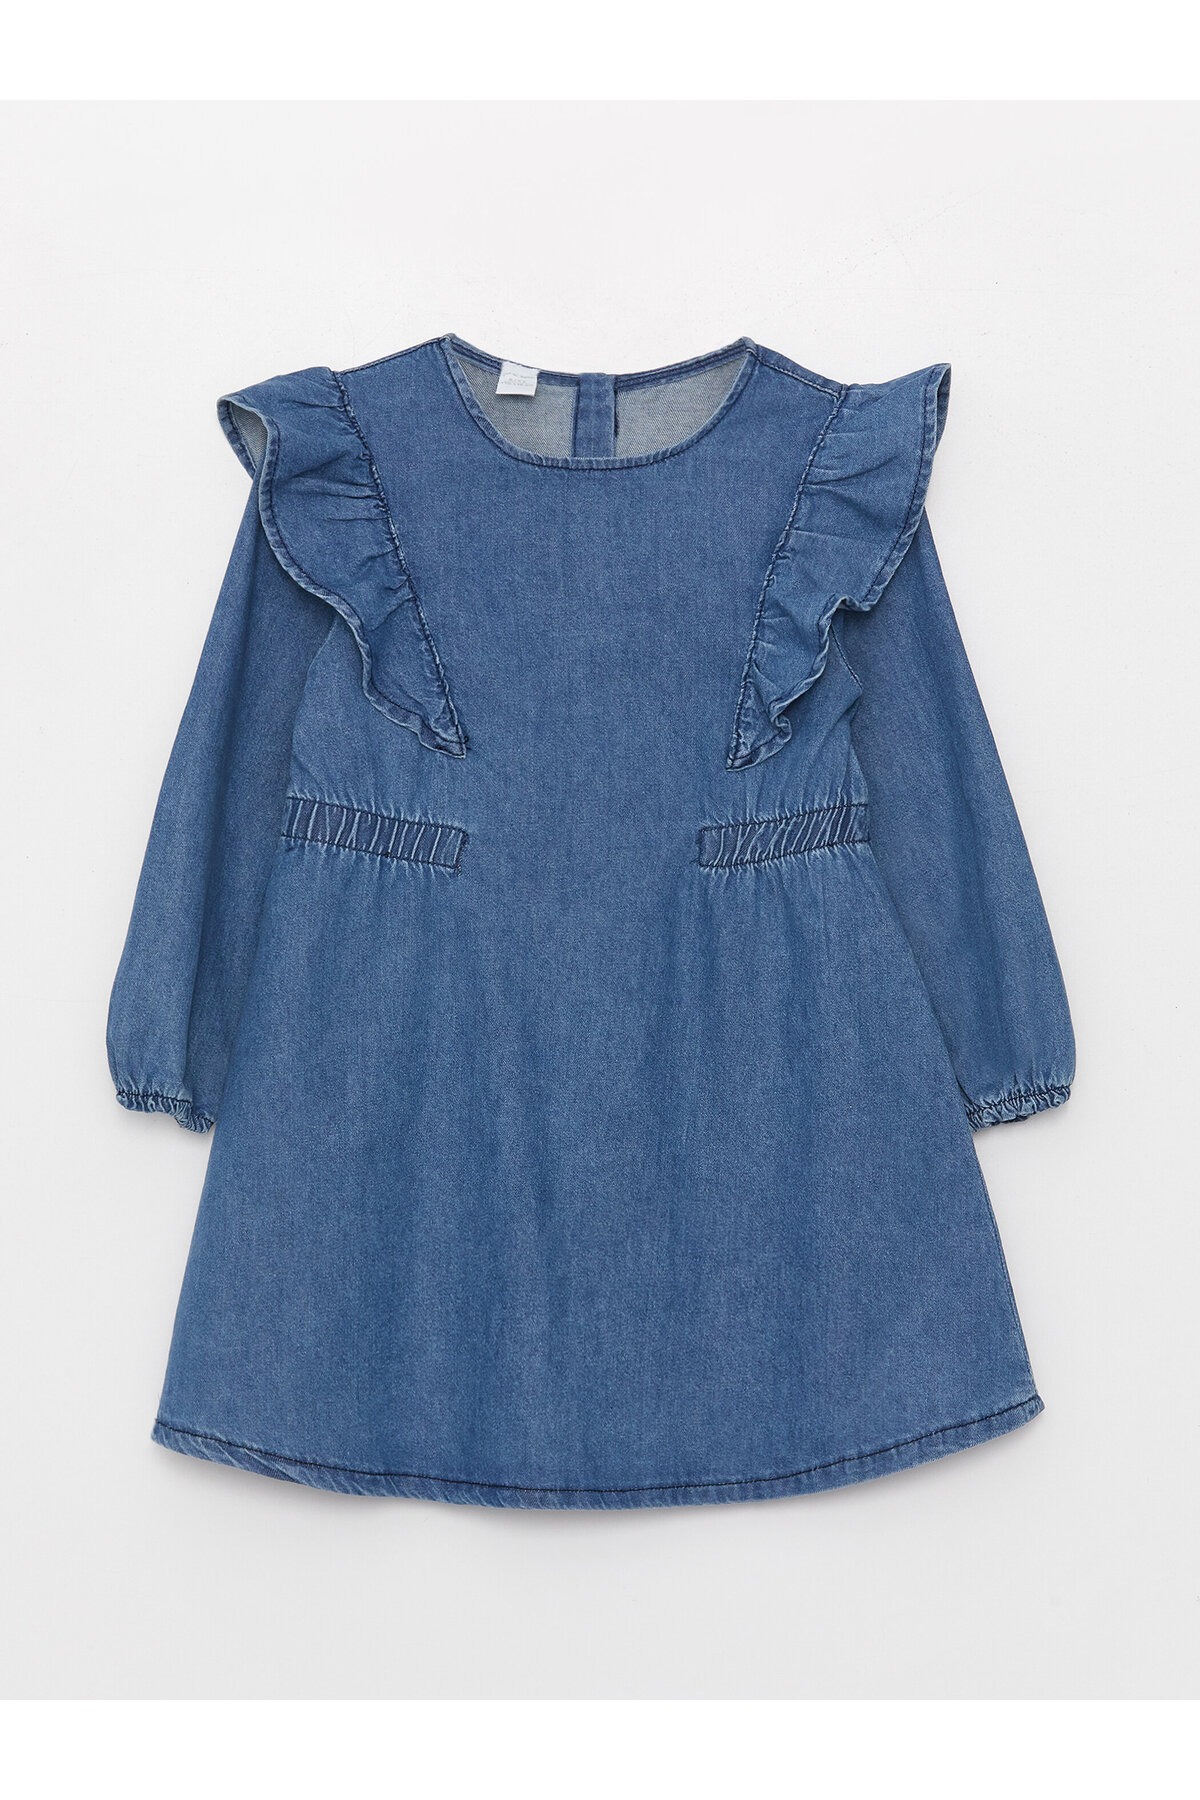 LC Waikiki Crew Neck Long Sleeved Jean Dress for Baby Girl